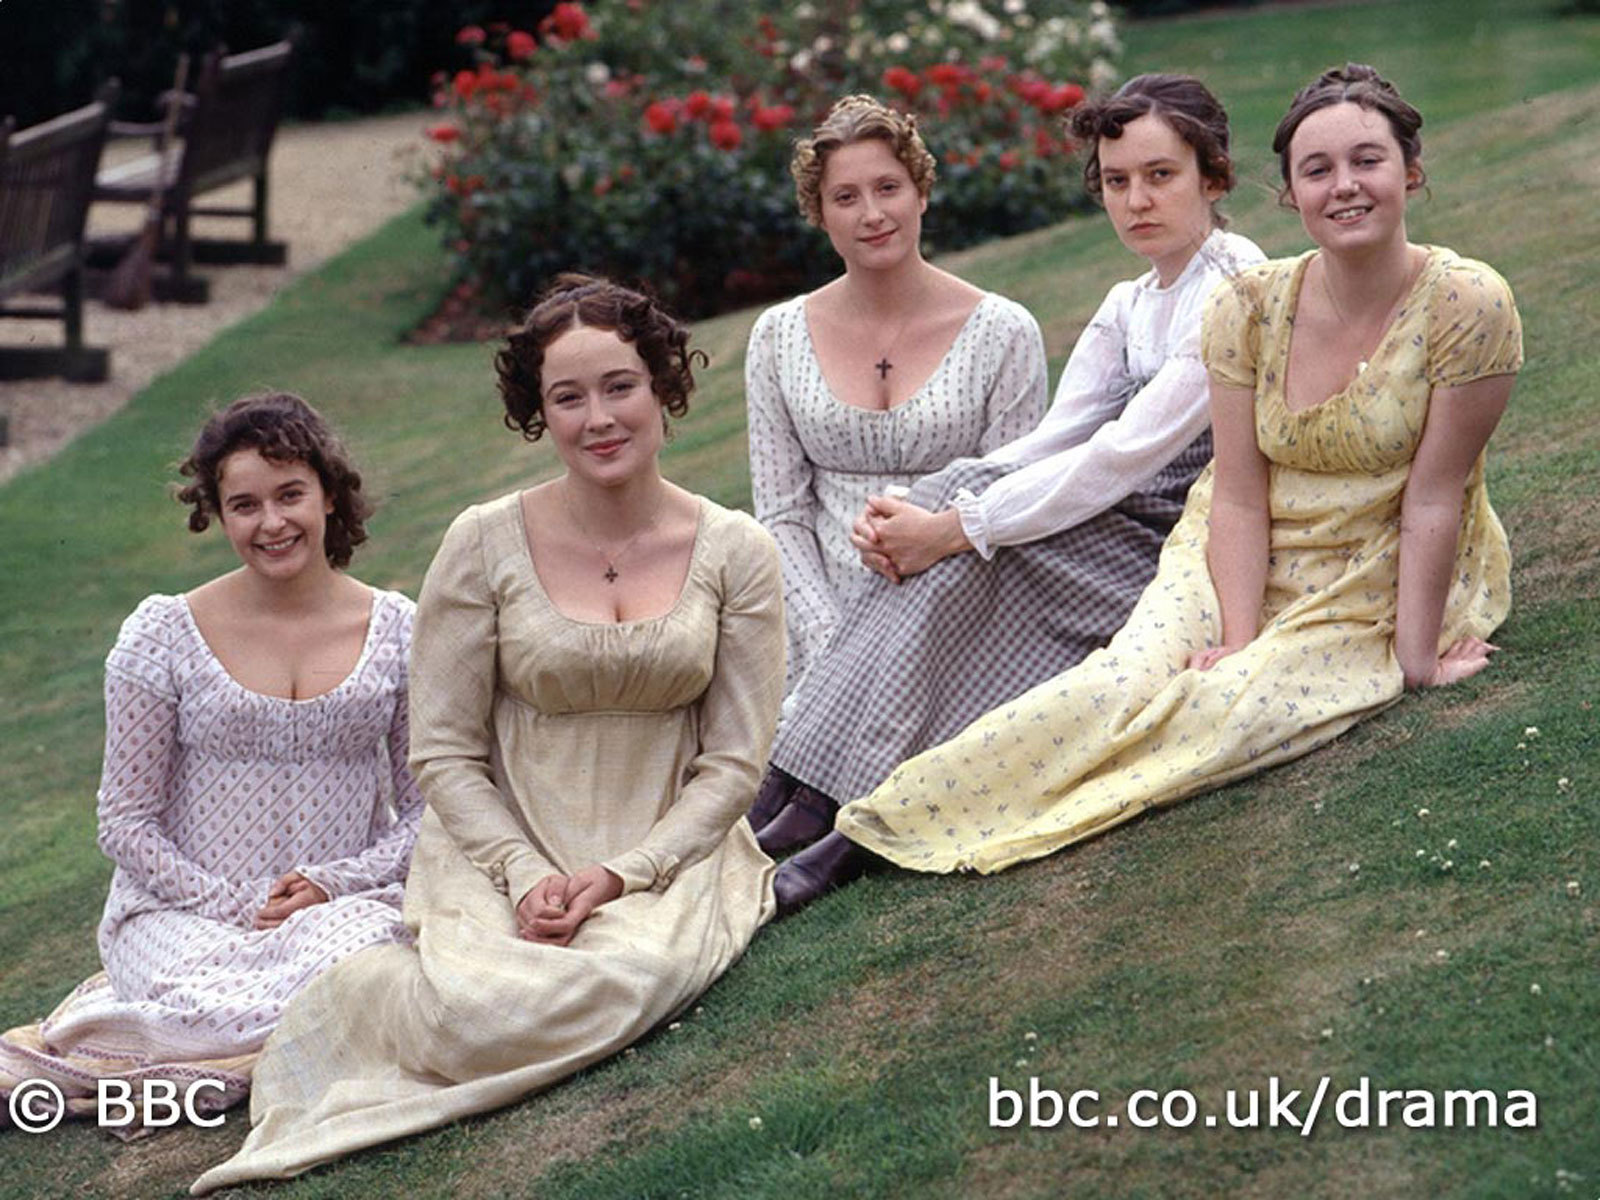 Still of Jennifer Ehle, Lucy Briers, Susannah Harker, Polly Maberly and Julia Sawalha in Pride and Prejudice (1995)